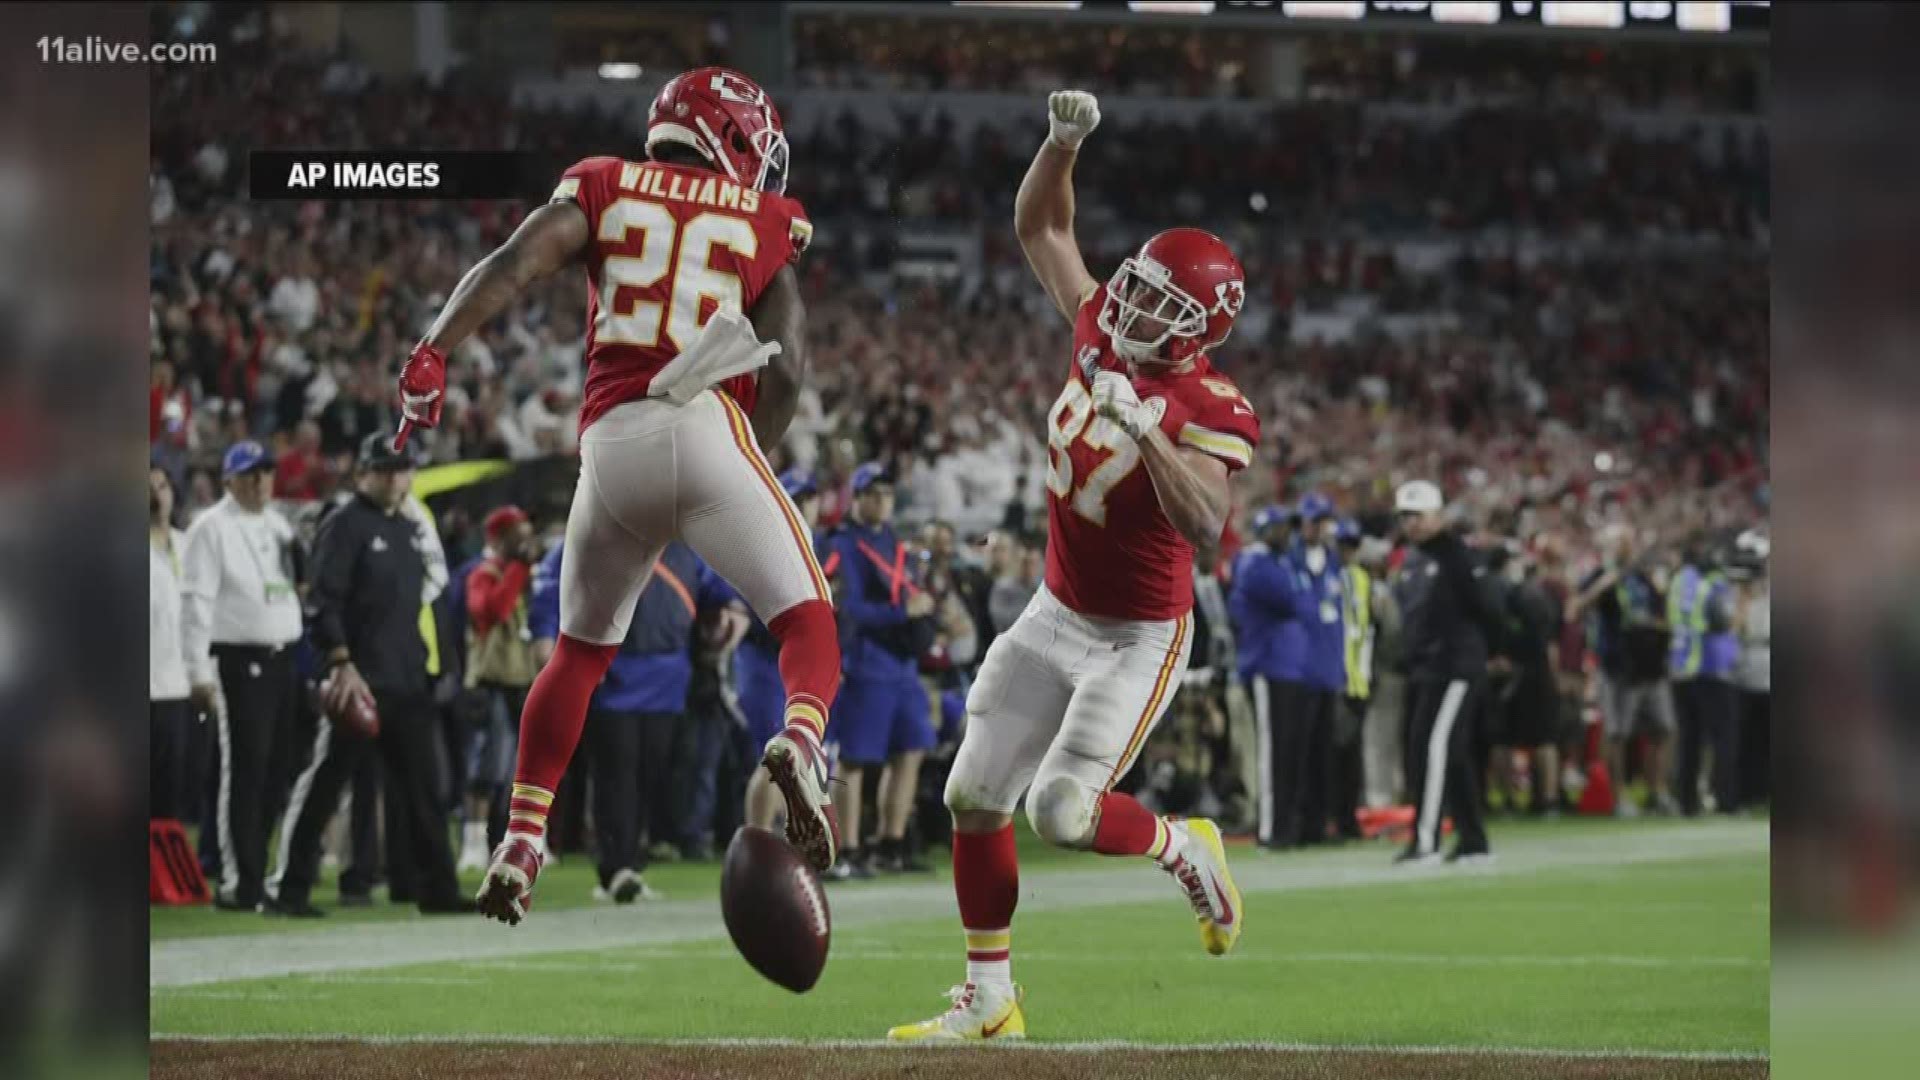 The 31-20 victory is a first for Kansas City in 50 years.